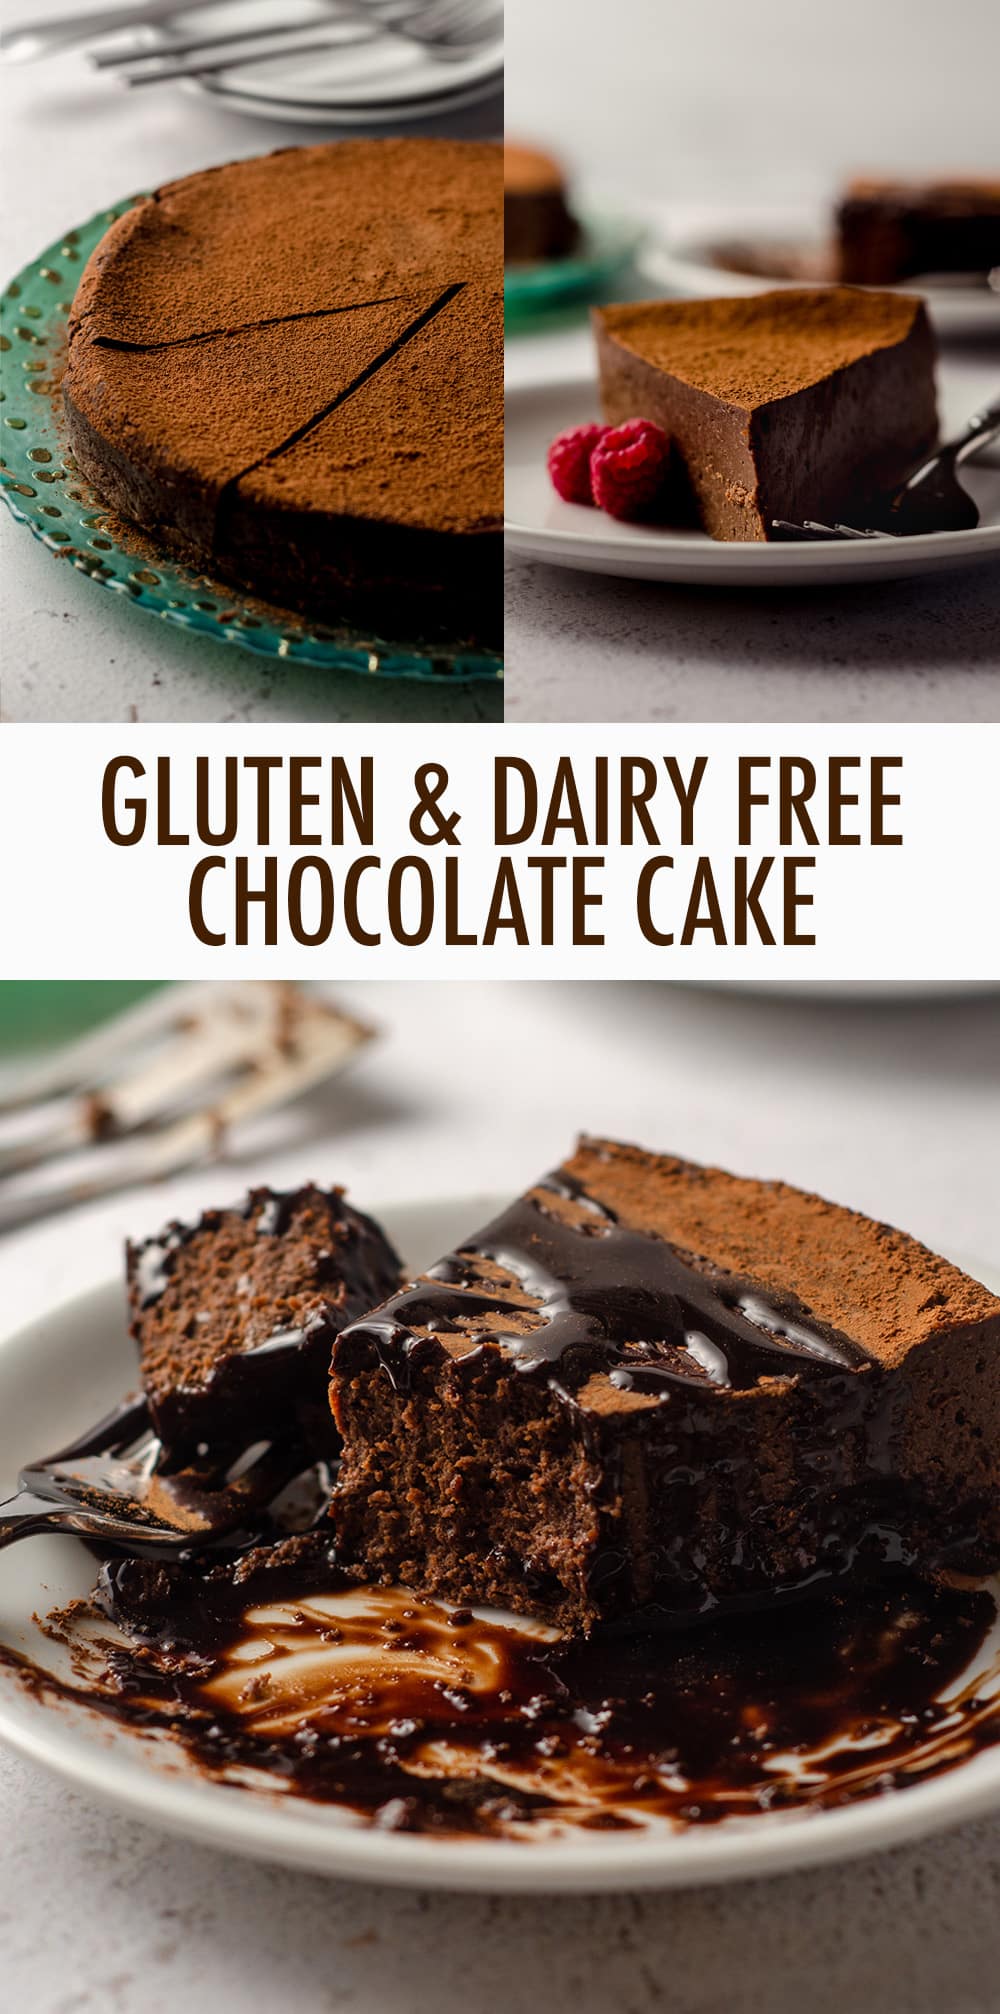 You only need 3 ingredients for this dense and fudgy gluten and dairy free chocolate cake. A perfectly blank canvas for any toppings or frosting you desire! via @frshaprilflours